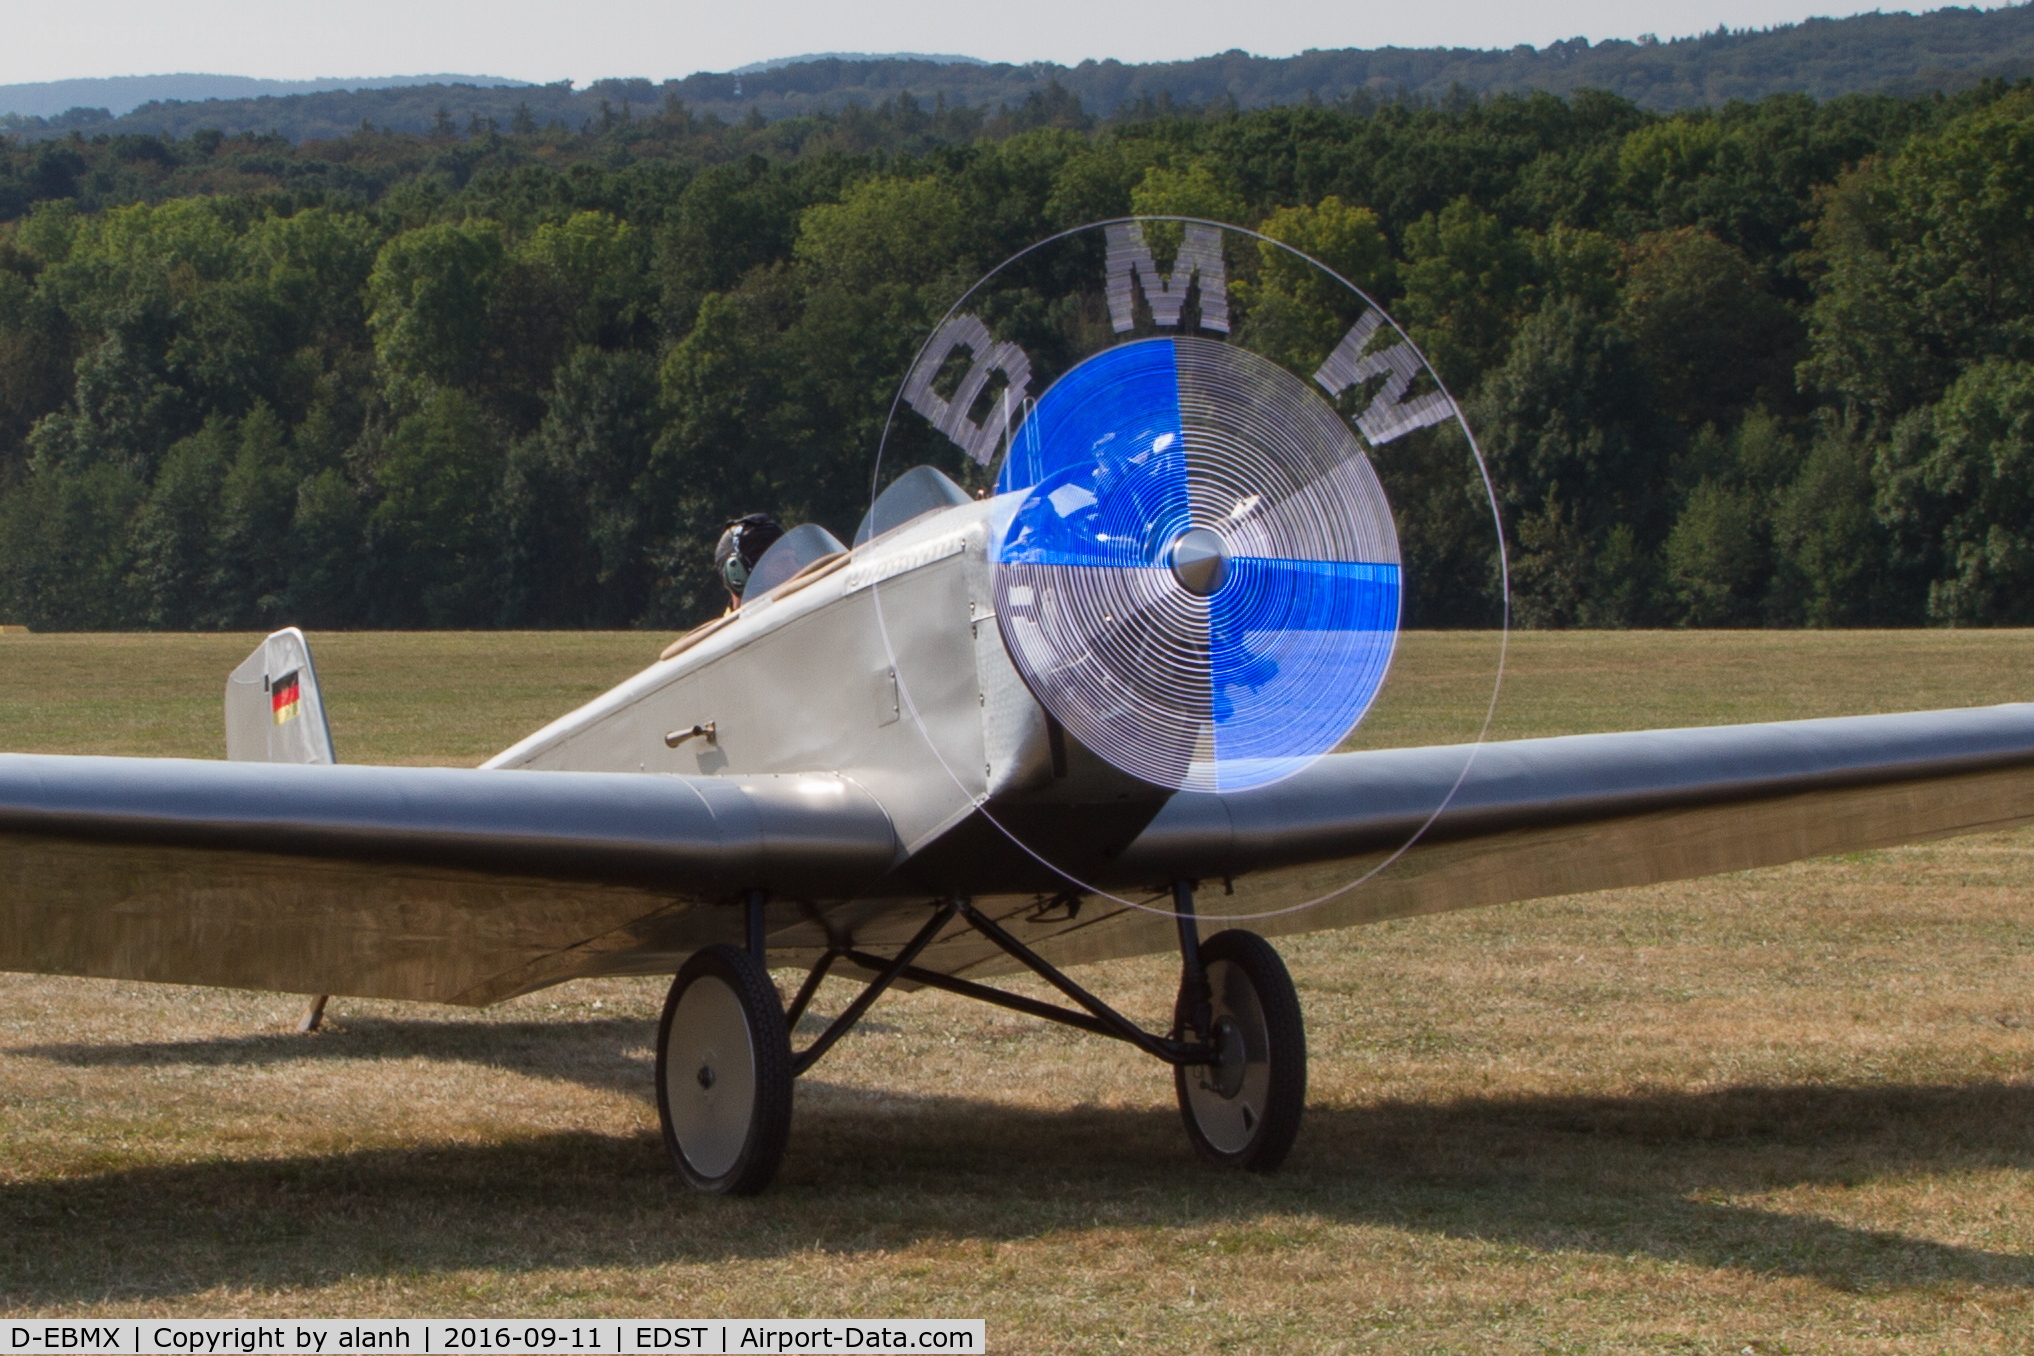 D-EBMX, 1927 Klemm Kl-25-1A C/N 149, Taxying with the illuminated BMW logo on the propellor, at the 2016 Hahnweide Oldtimer Fliegertreffen